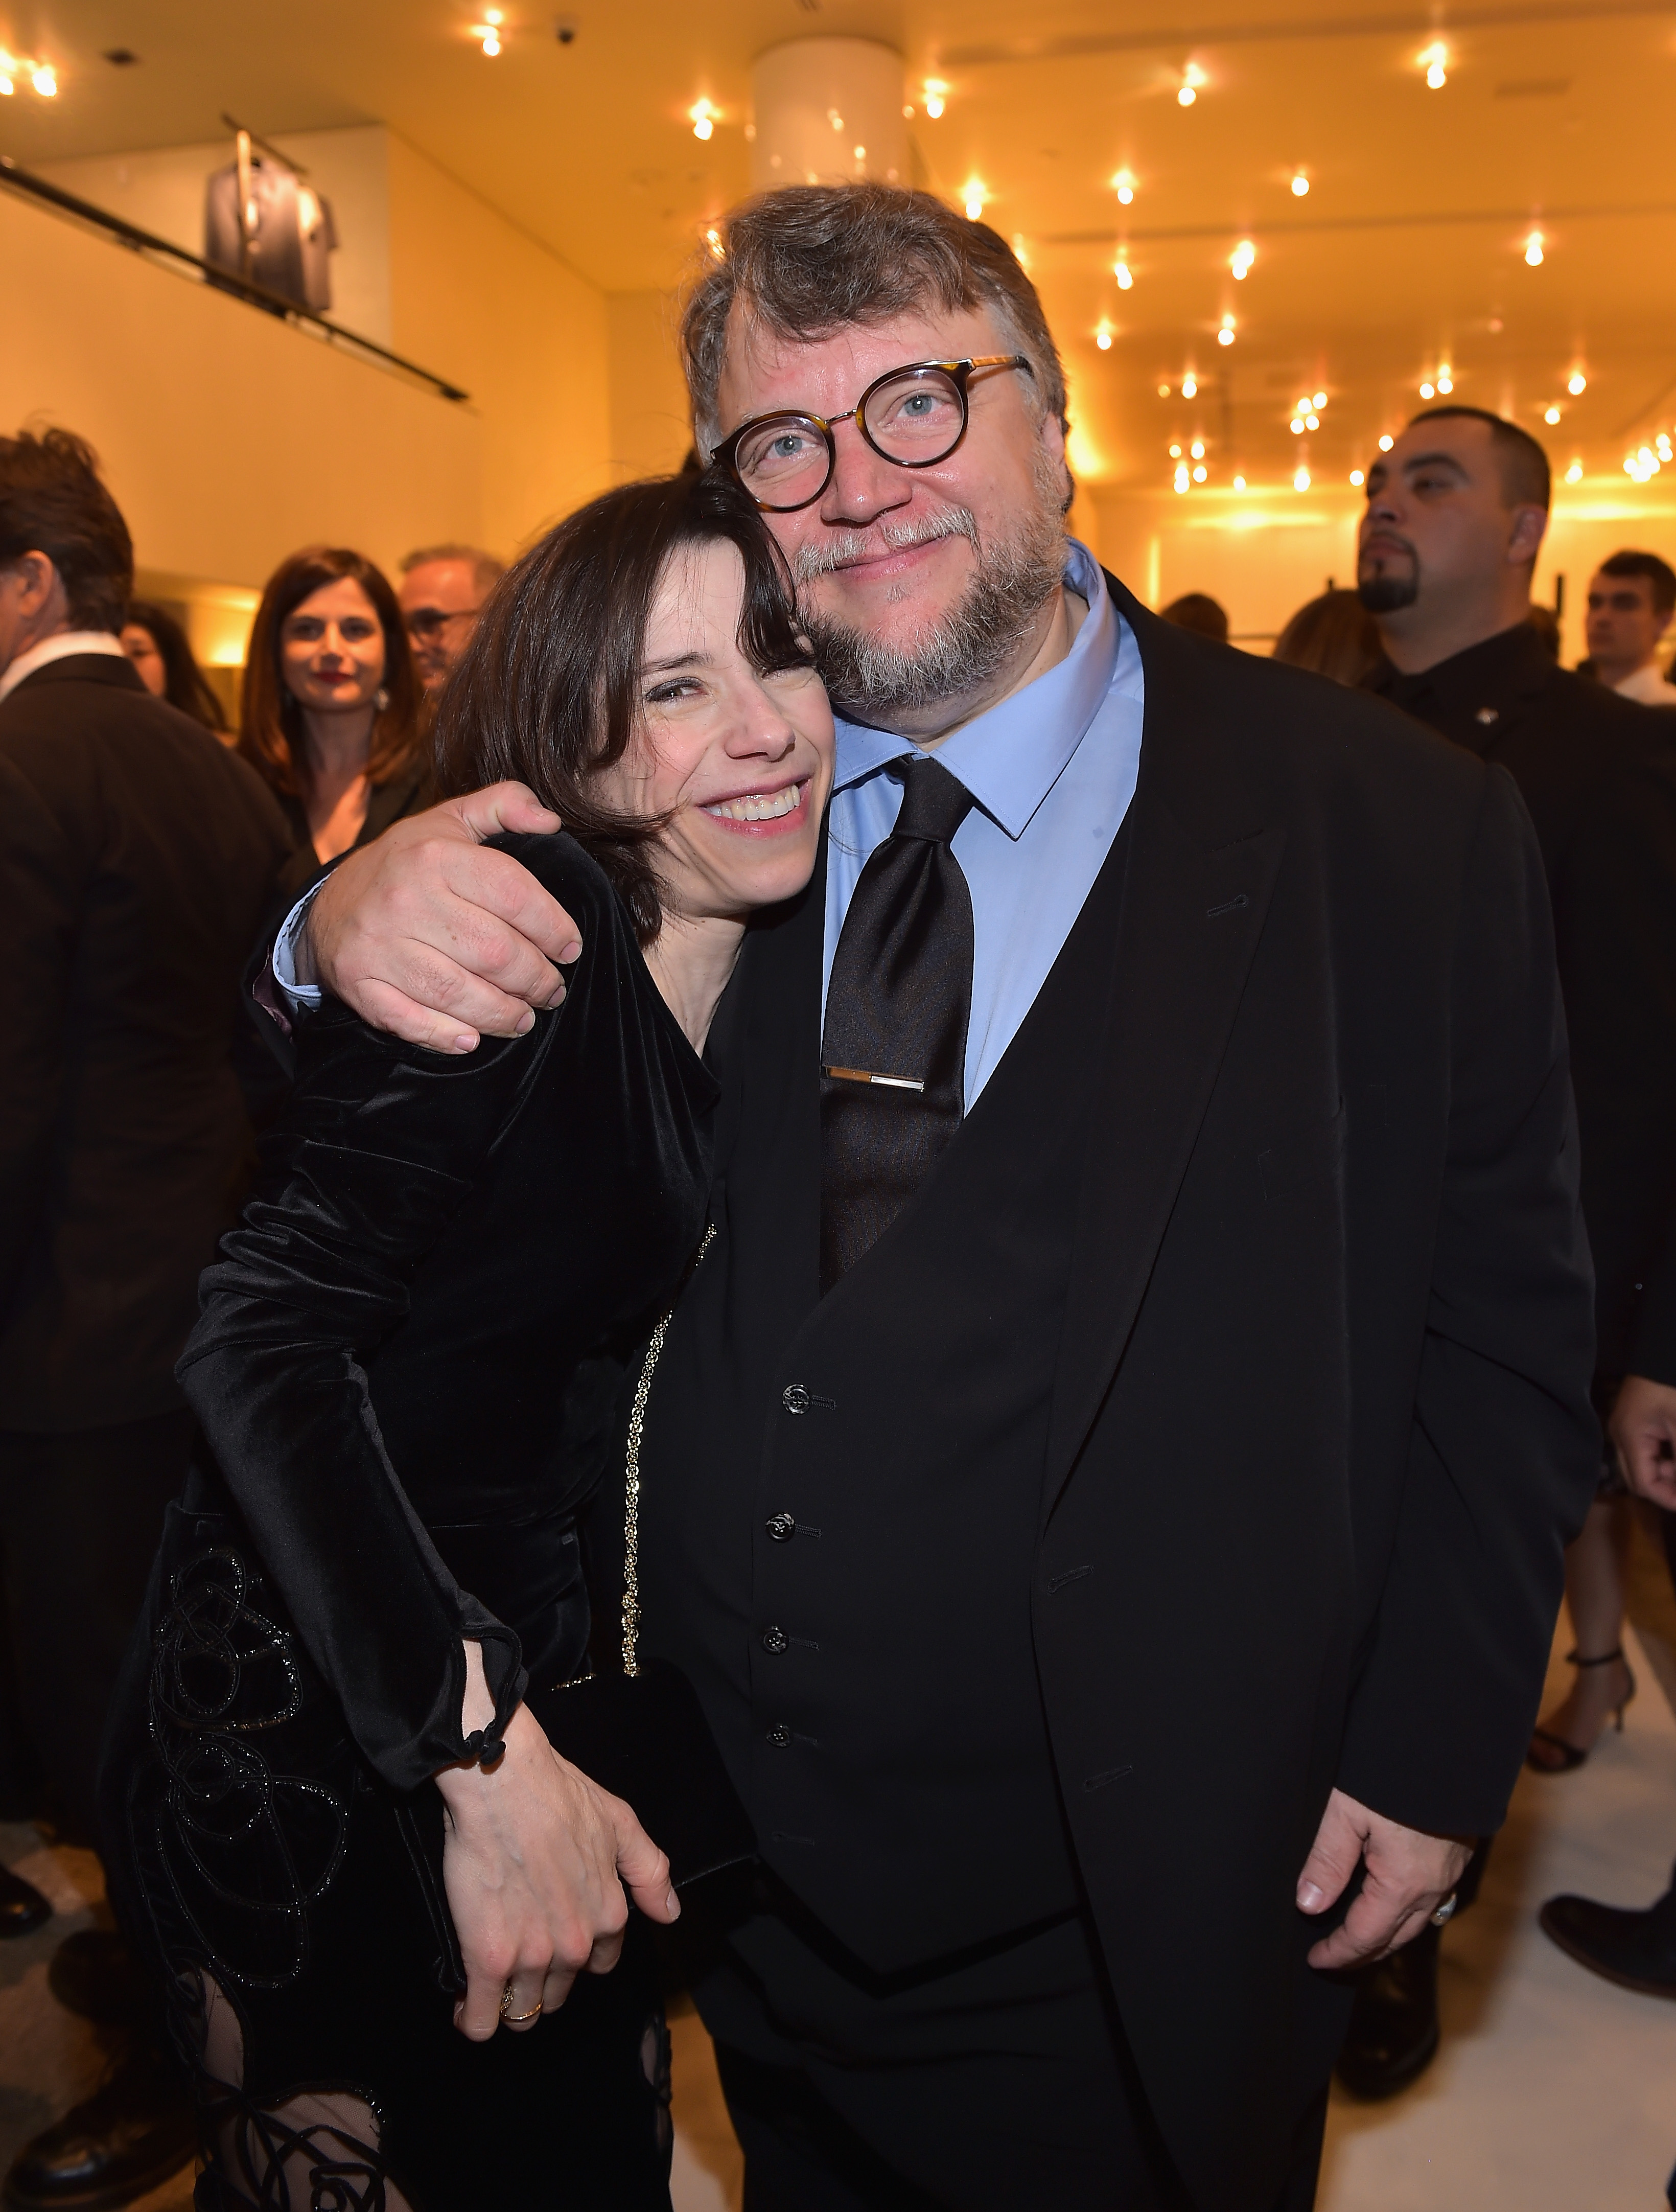 Sally Hawkins and Guillermo Del Toro pose at Giorgio Armani's celebration of "The Shape of Water," hosted by Roberta Armani, on March 3, 2018, in Beverly Hills, California | Source: Getty Images